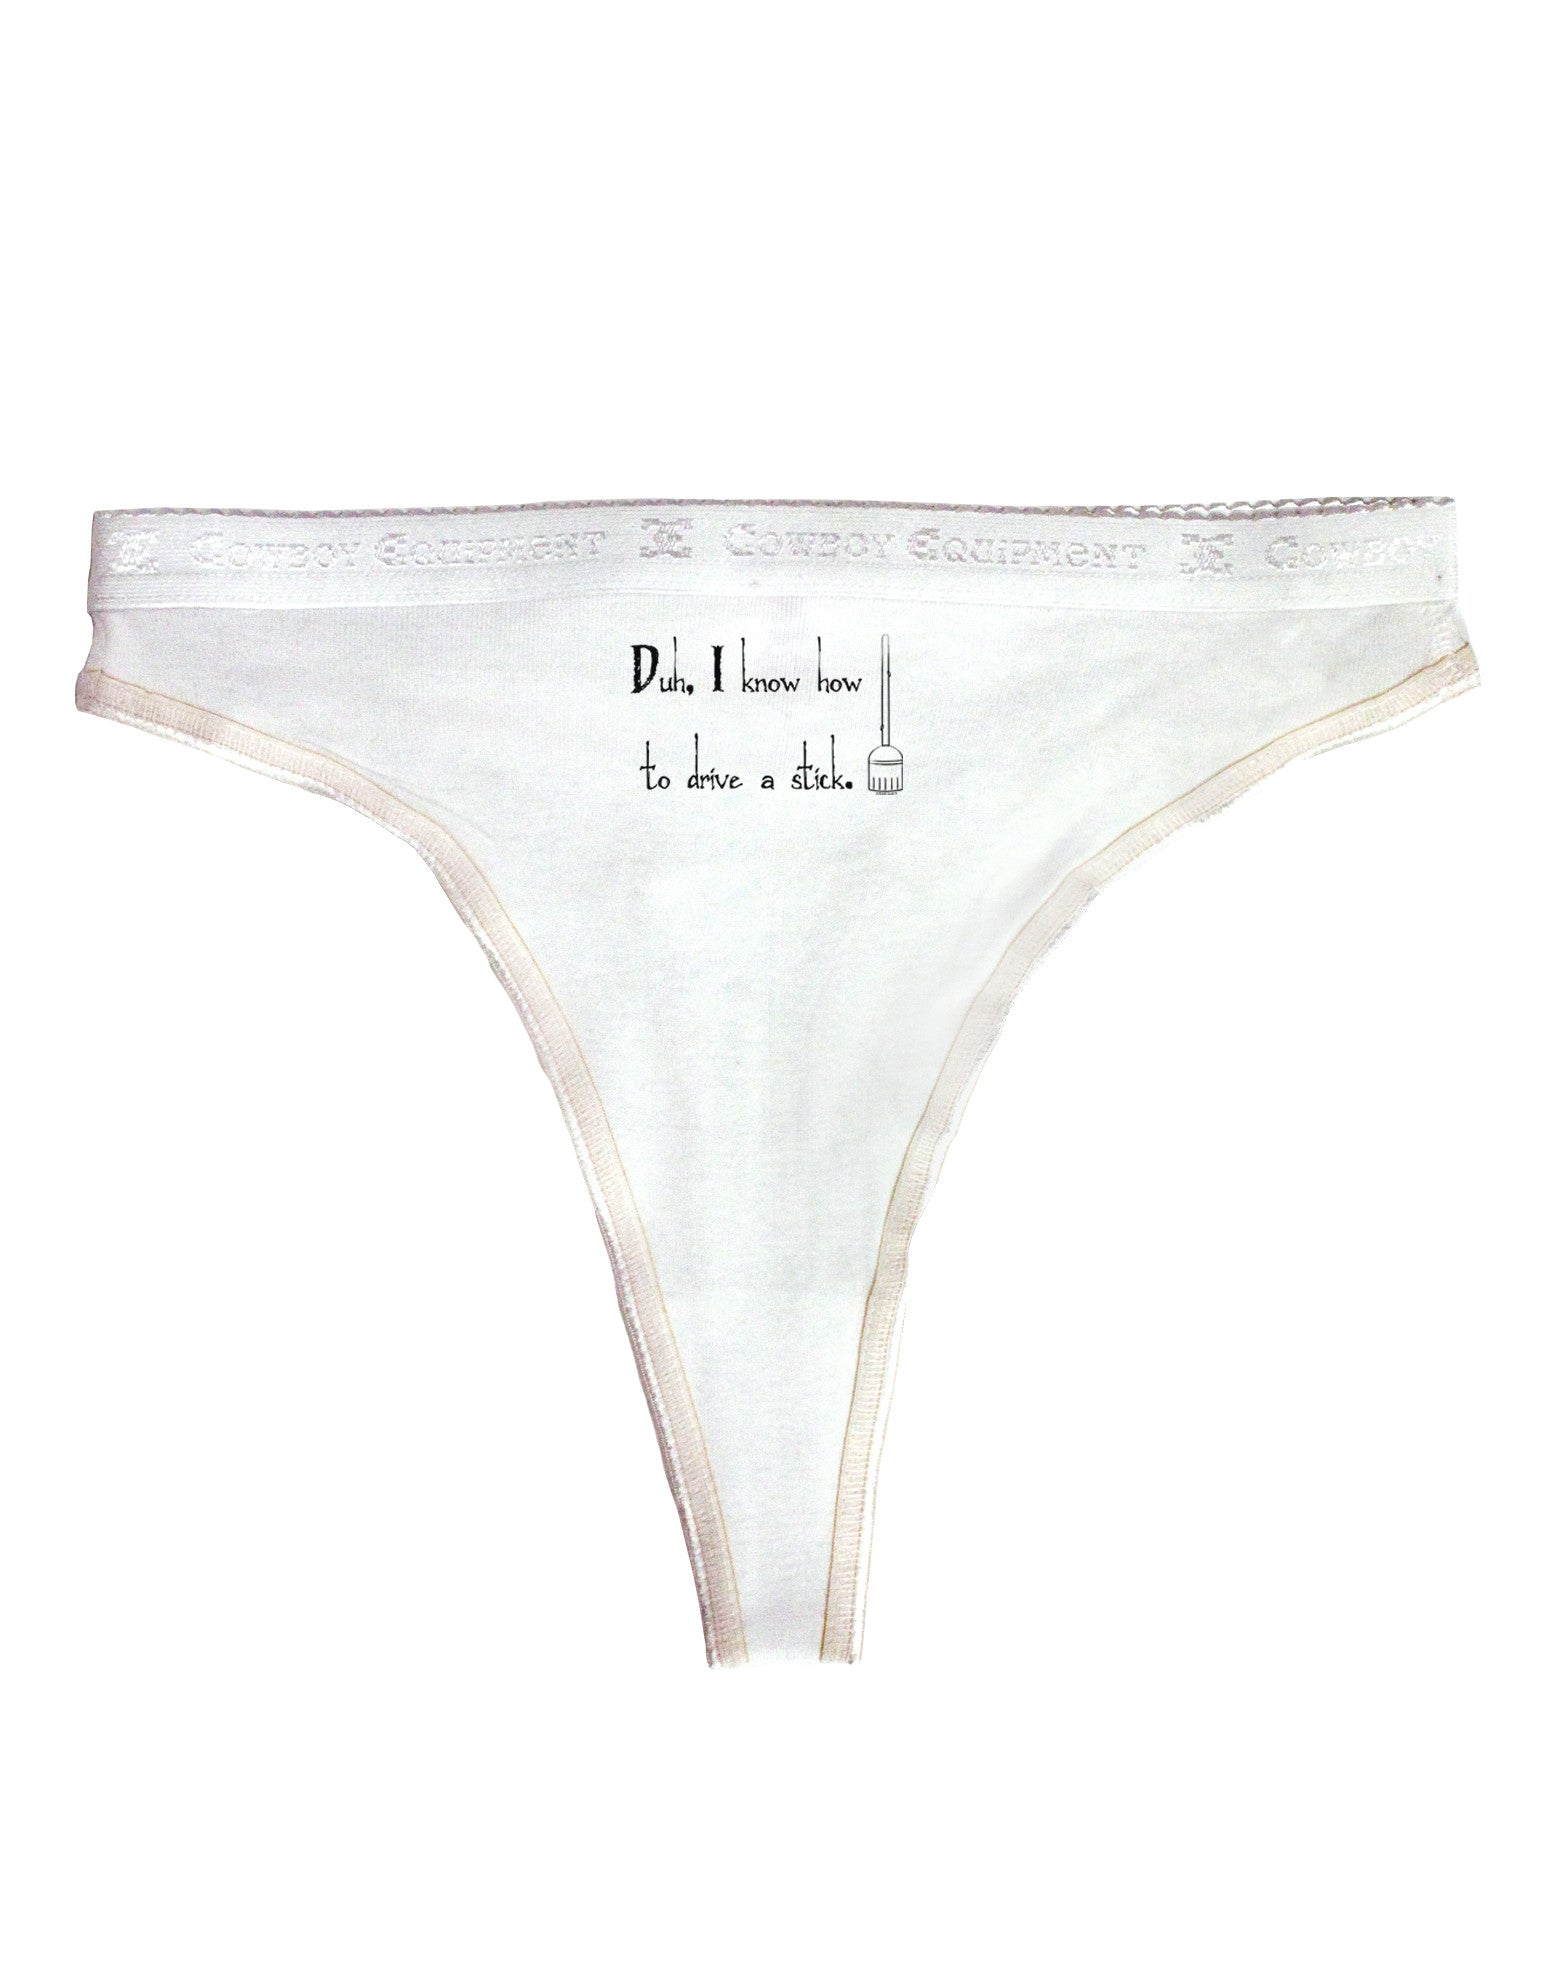 Duh I know How to Drive a Stick - Funny Womens Thong Underwear